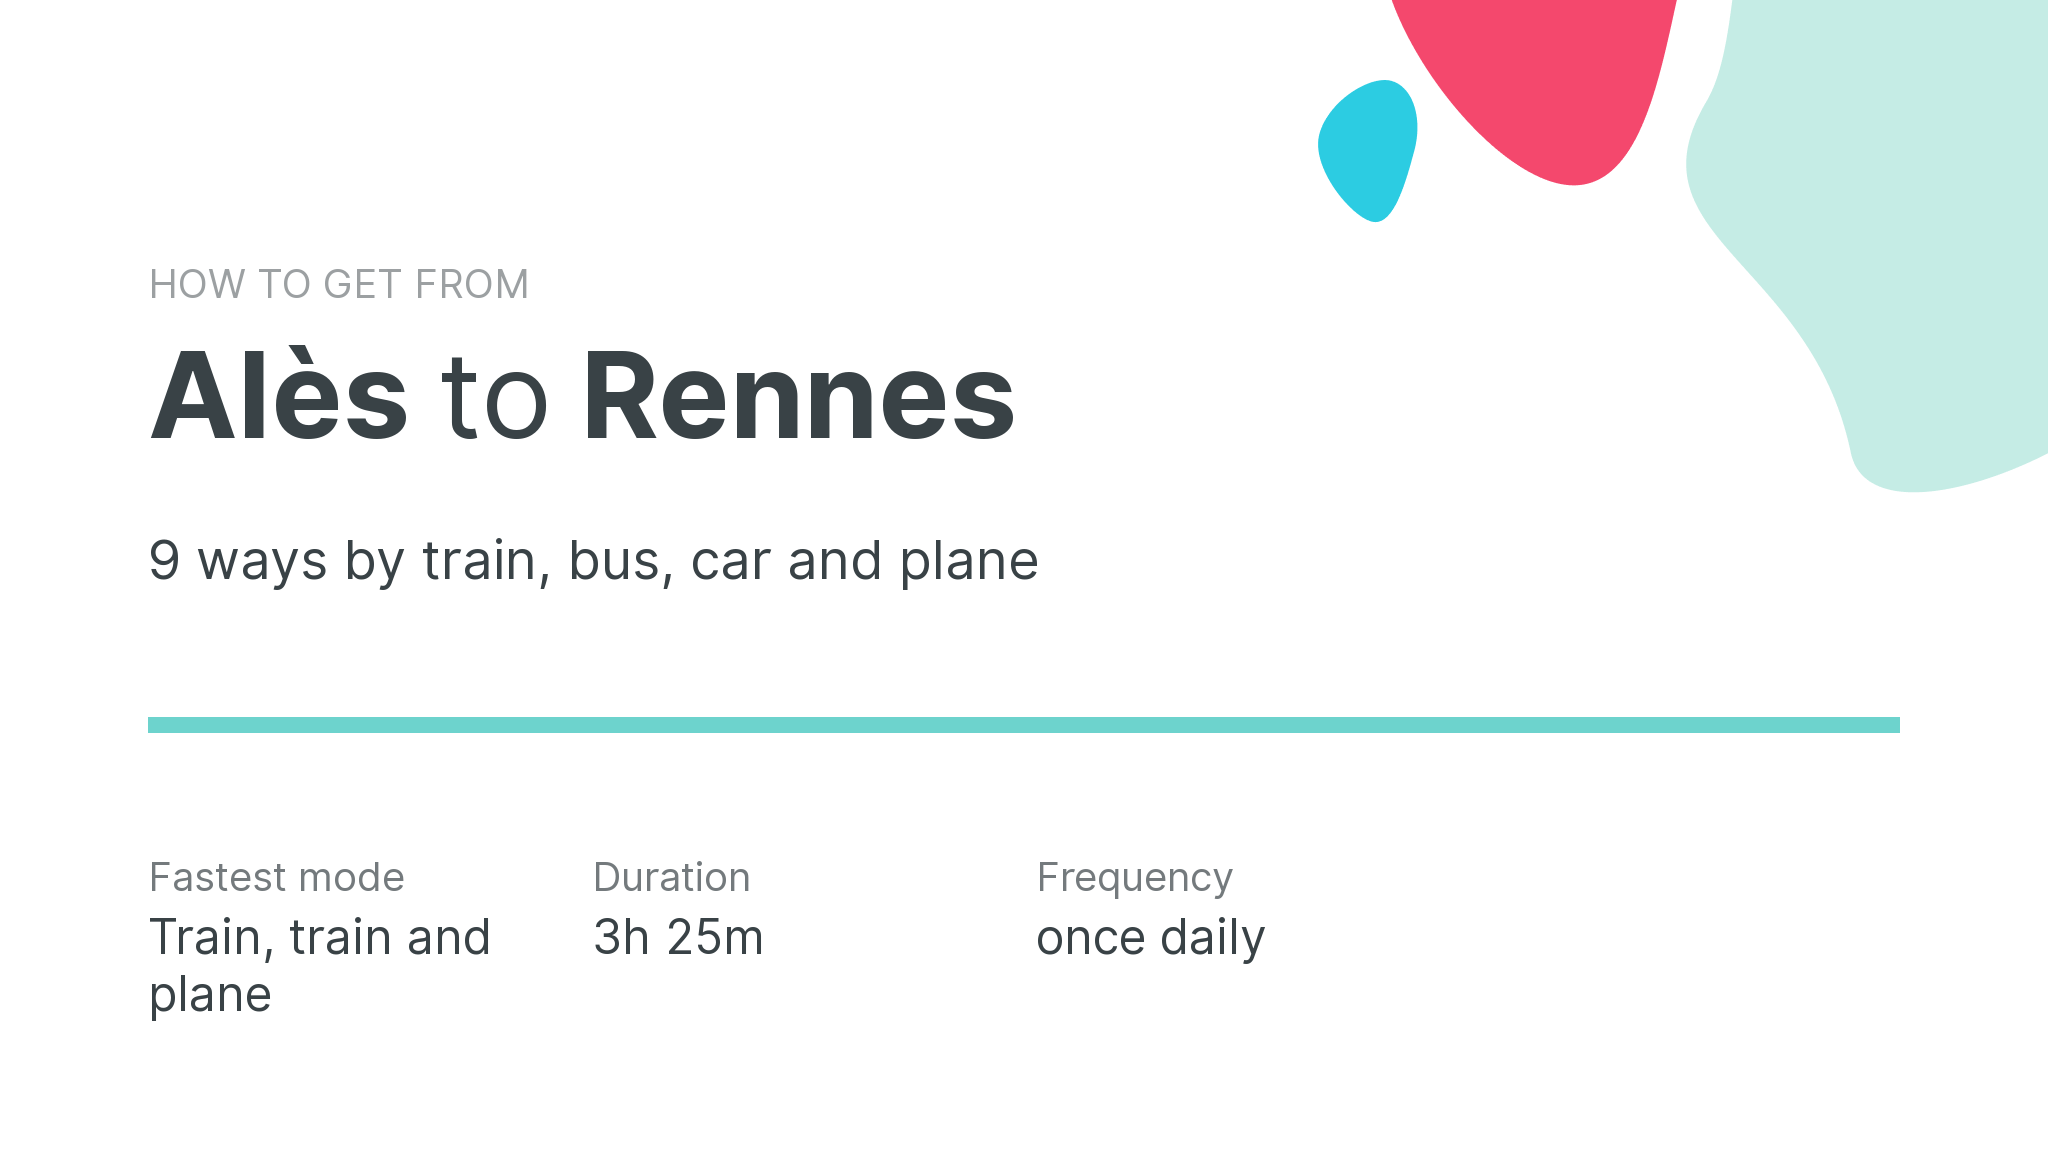 How do I get from Alès to Rennes